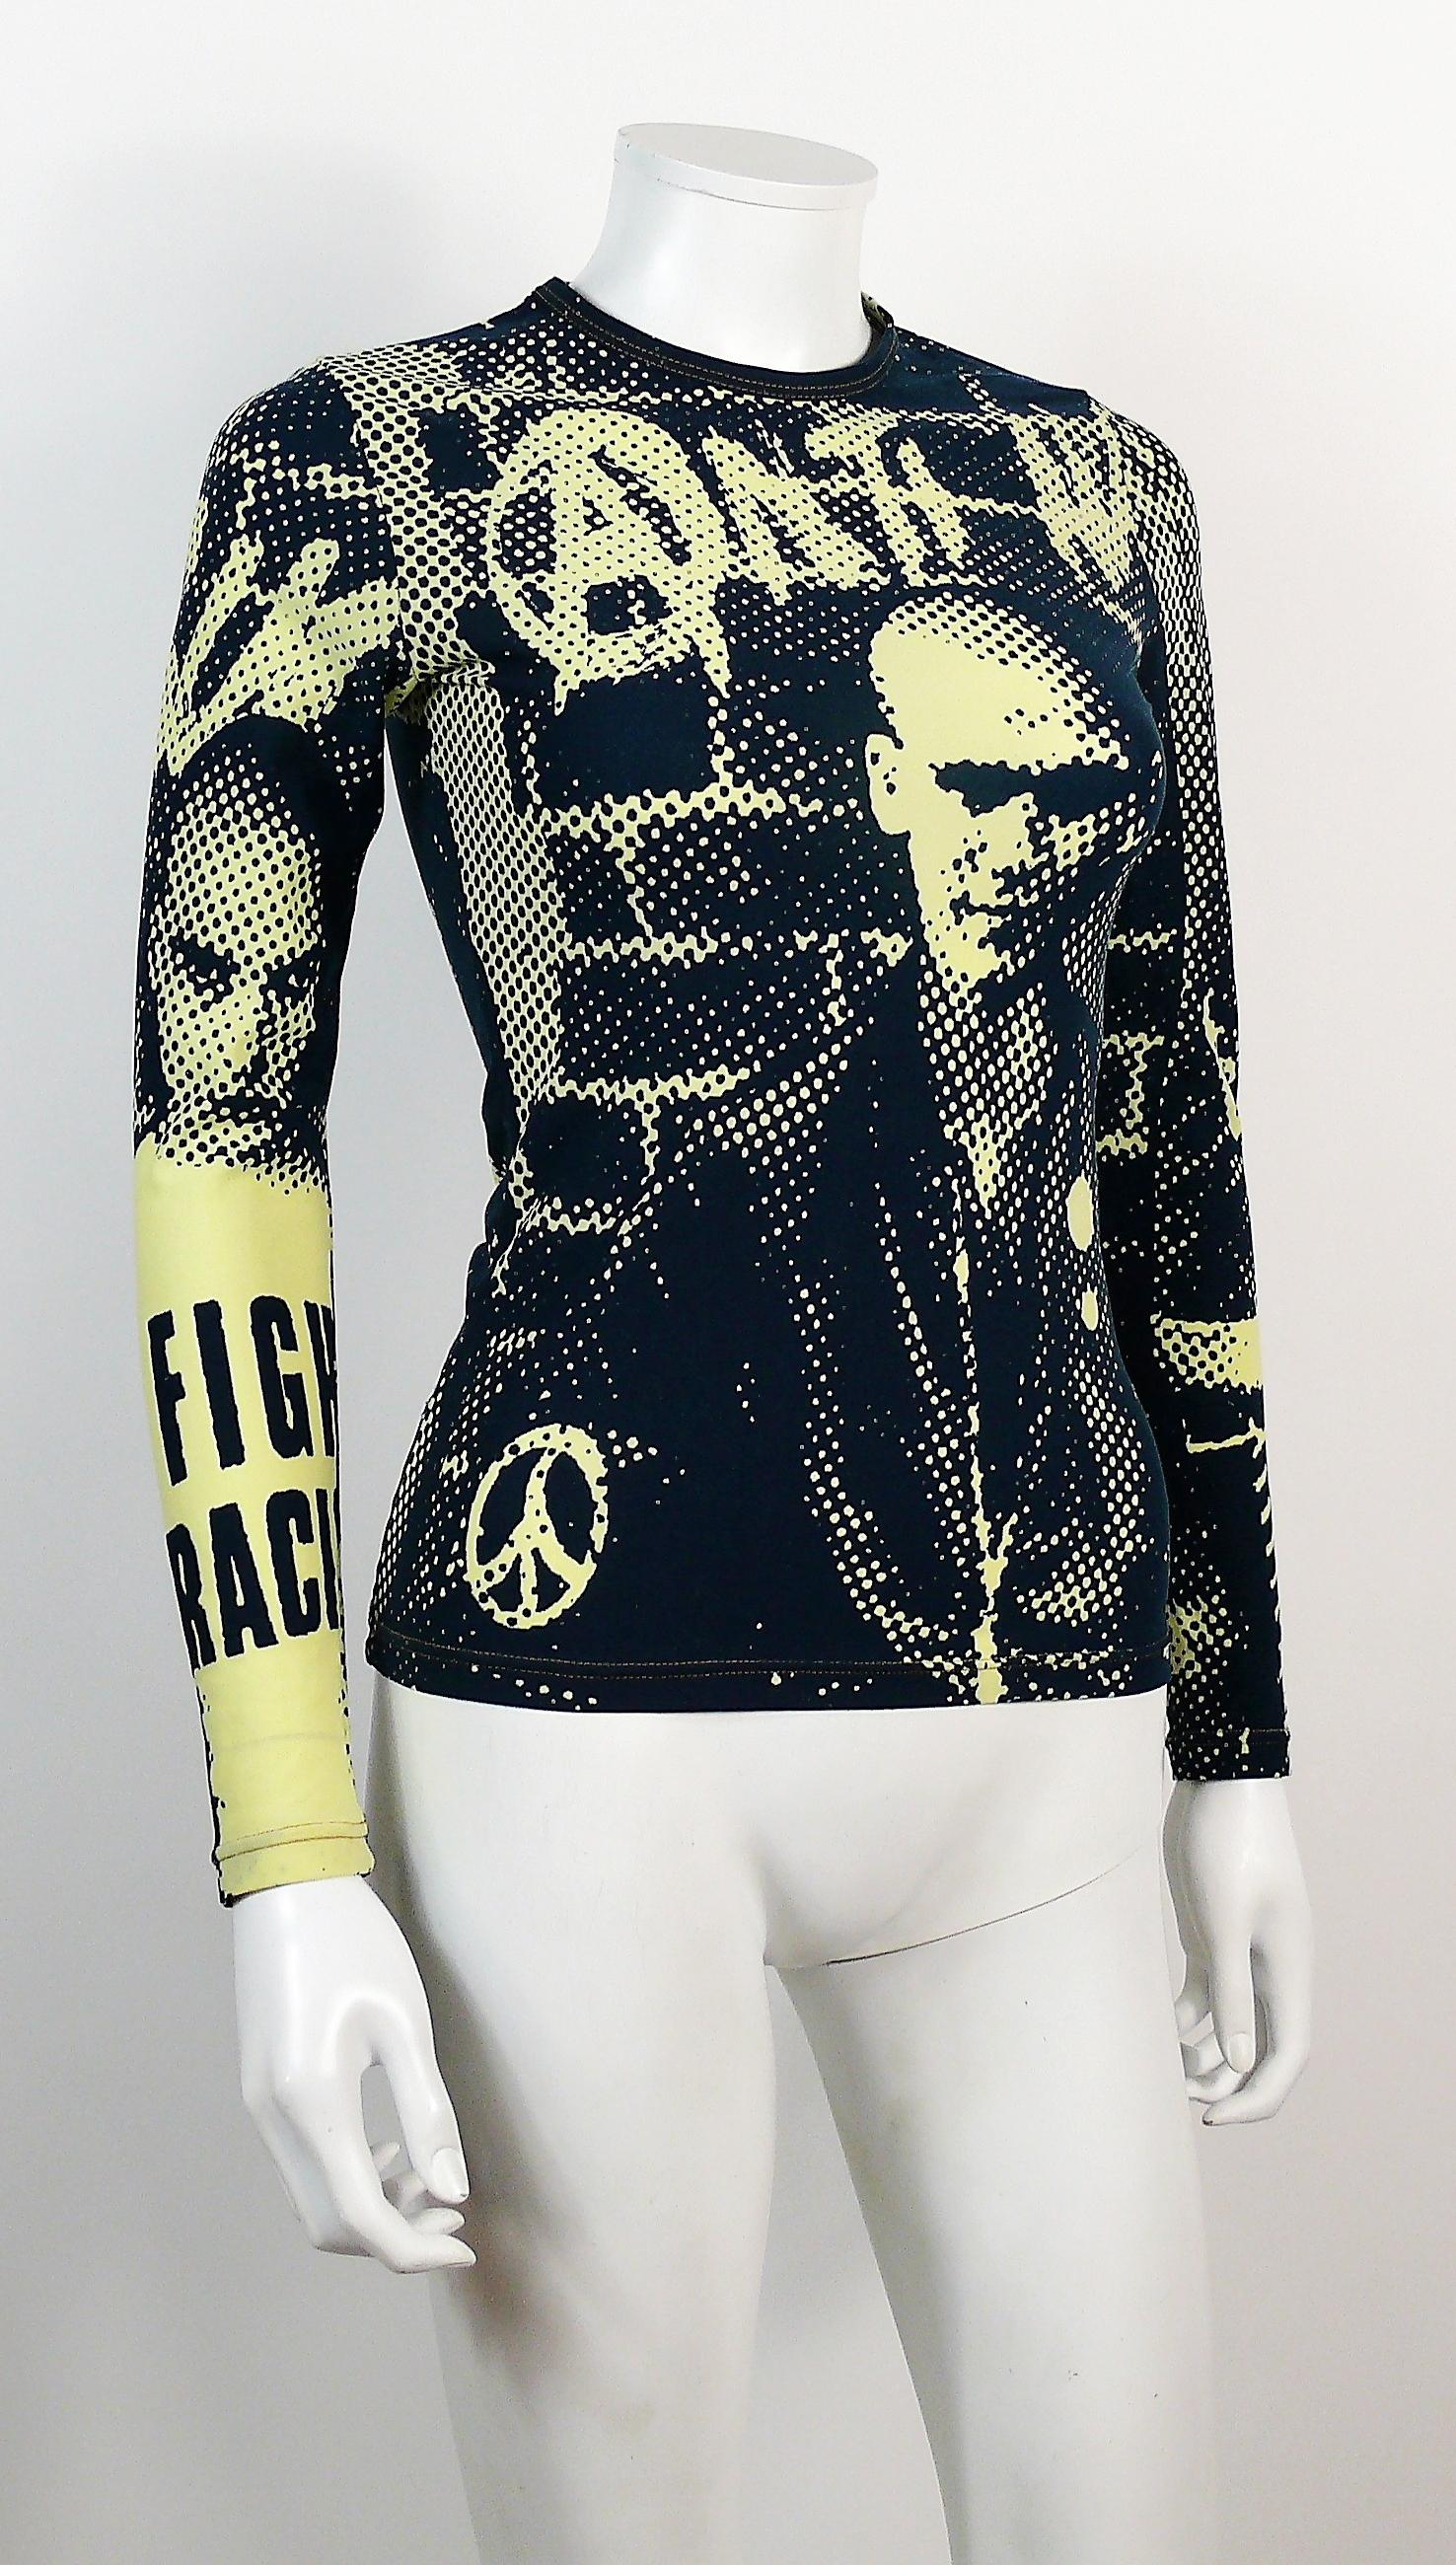 JEAN PAUL GAULTIER vintage long sleeve shirt from the Fight Racism Collection featuring a dark blue and green/yellow optical illusion print.

Round neck.
Stretchy material.

Label reads GAULTIER JEAN'S.
Made in France.

Size tag reads : 38.
Please